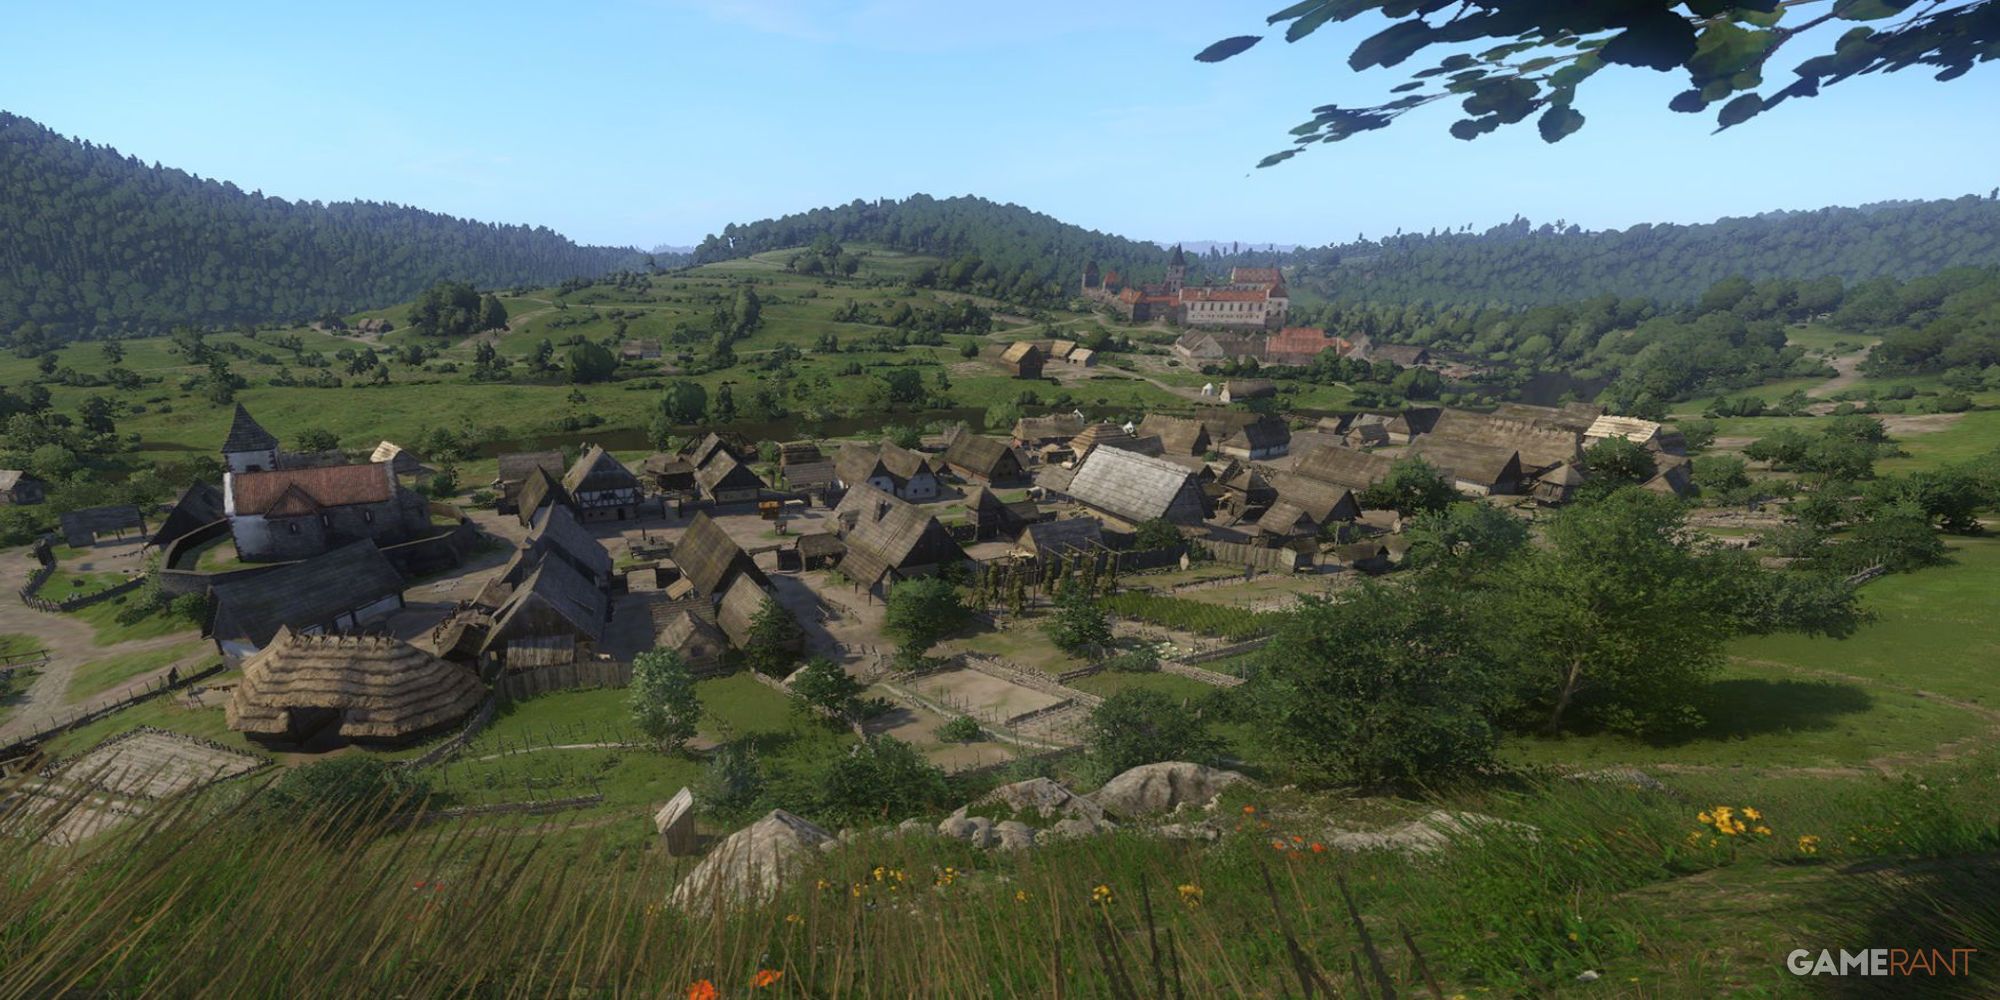 The monastery of Sassy and town of Rattay